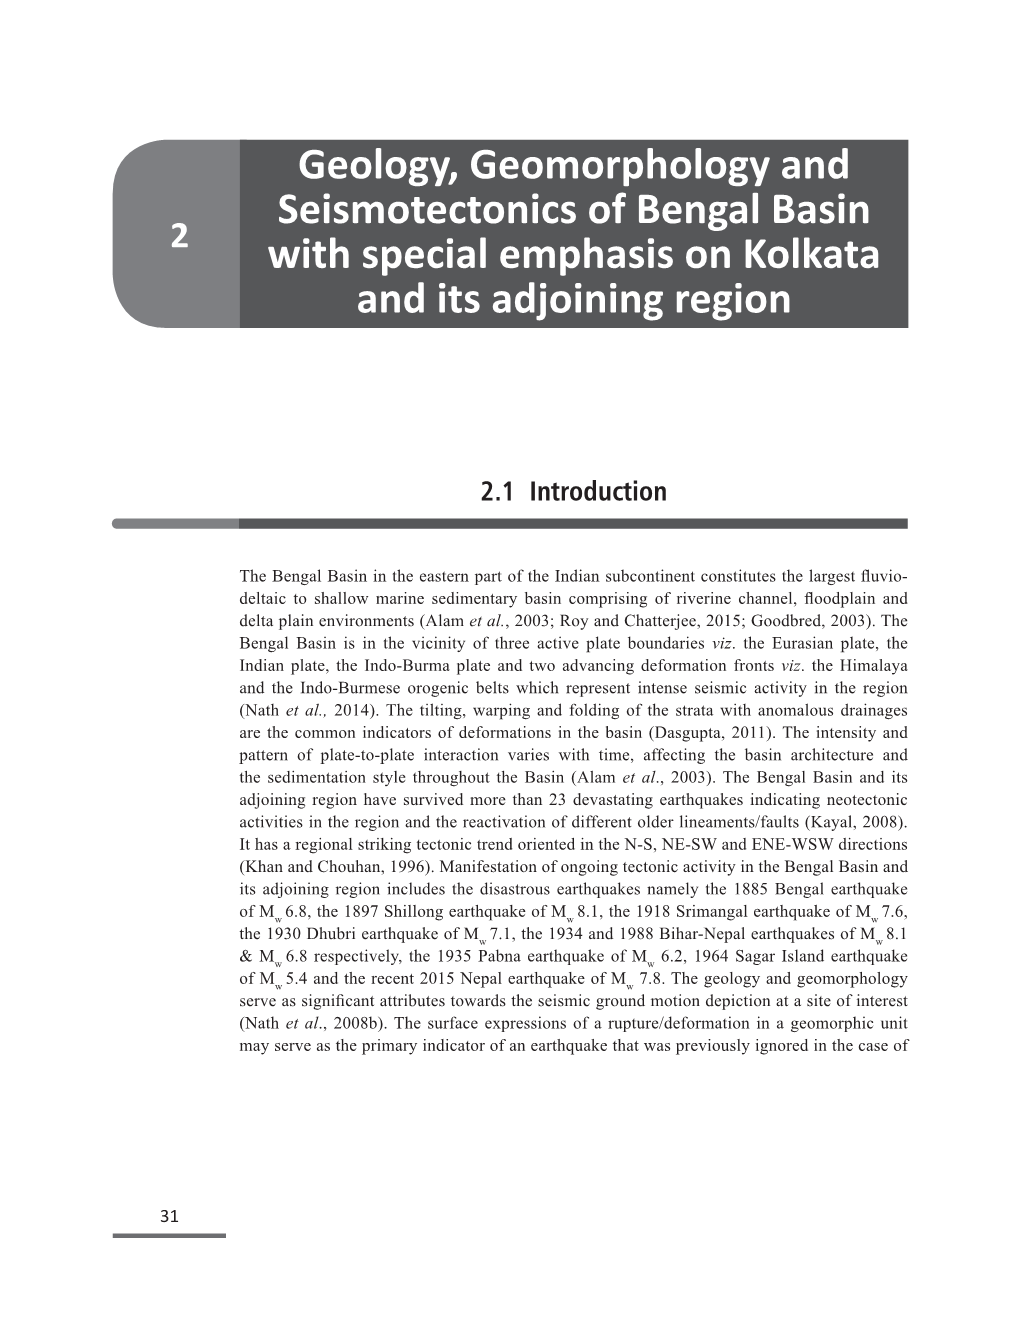 Geology, Geomorphology and Seismotectonics of Bengal Basin 2 with Special Emphasis on Kolkata and Its Adjoining Region